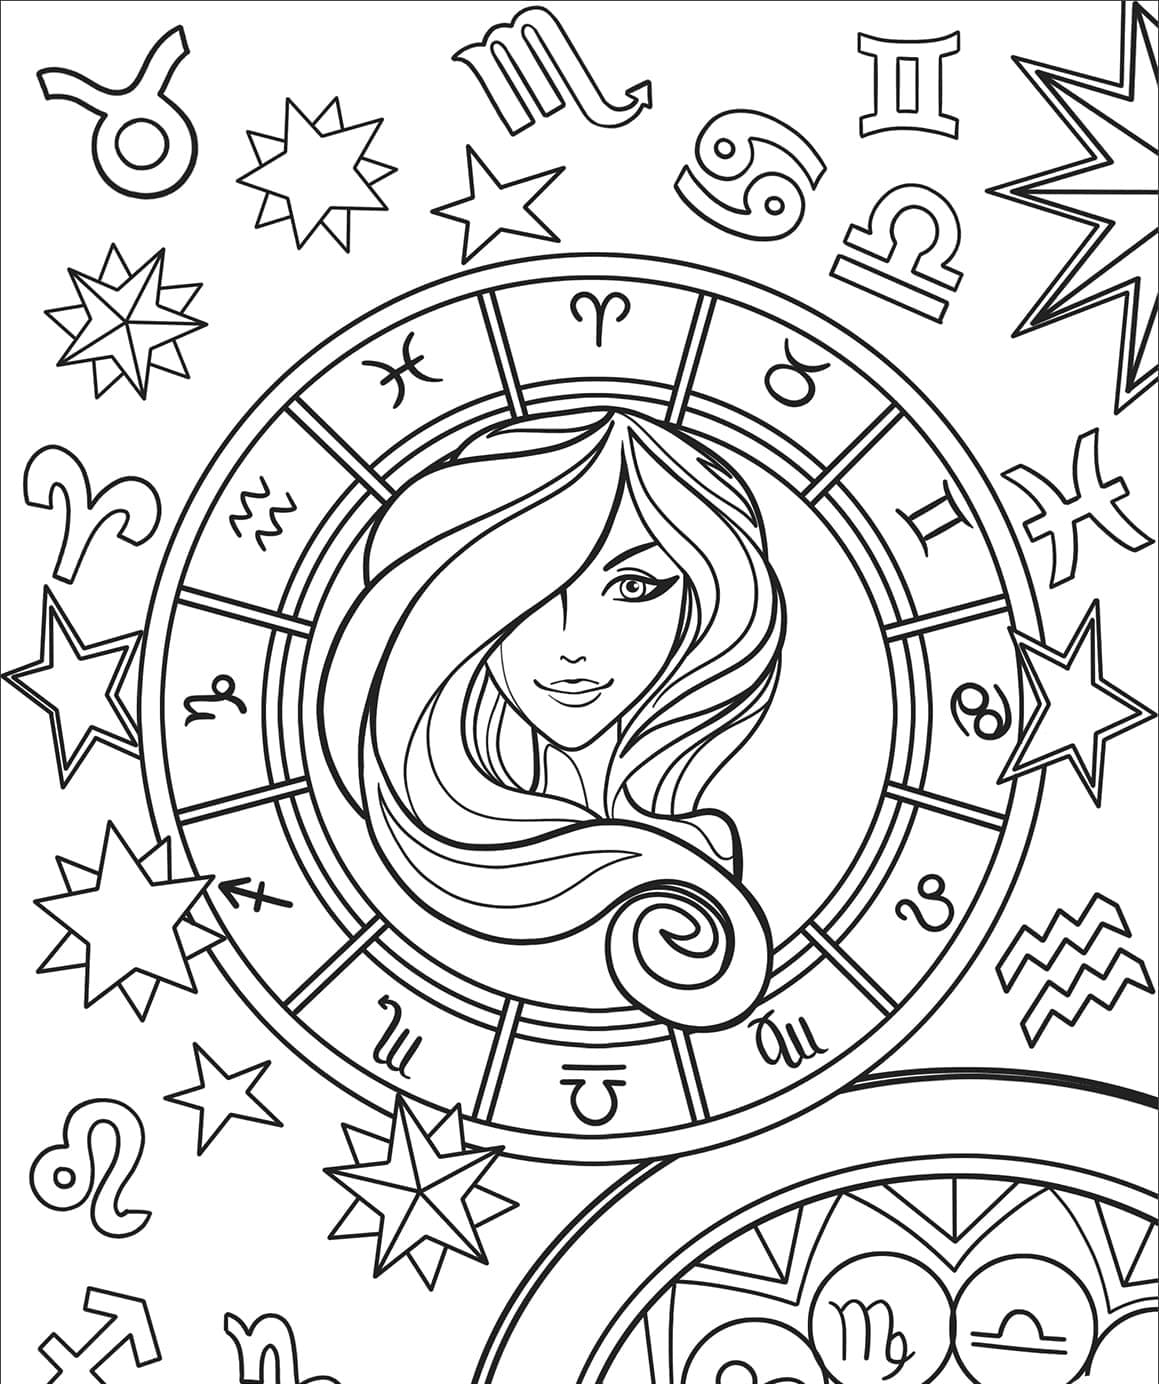 Nice Virgo Zodiac Sign coloring page - Download, Print or Color Online ...